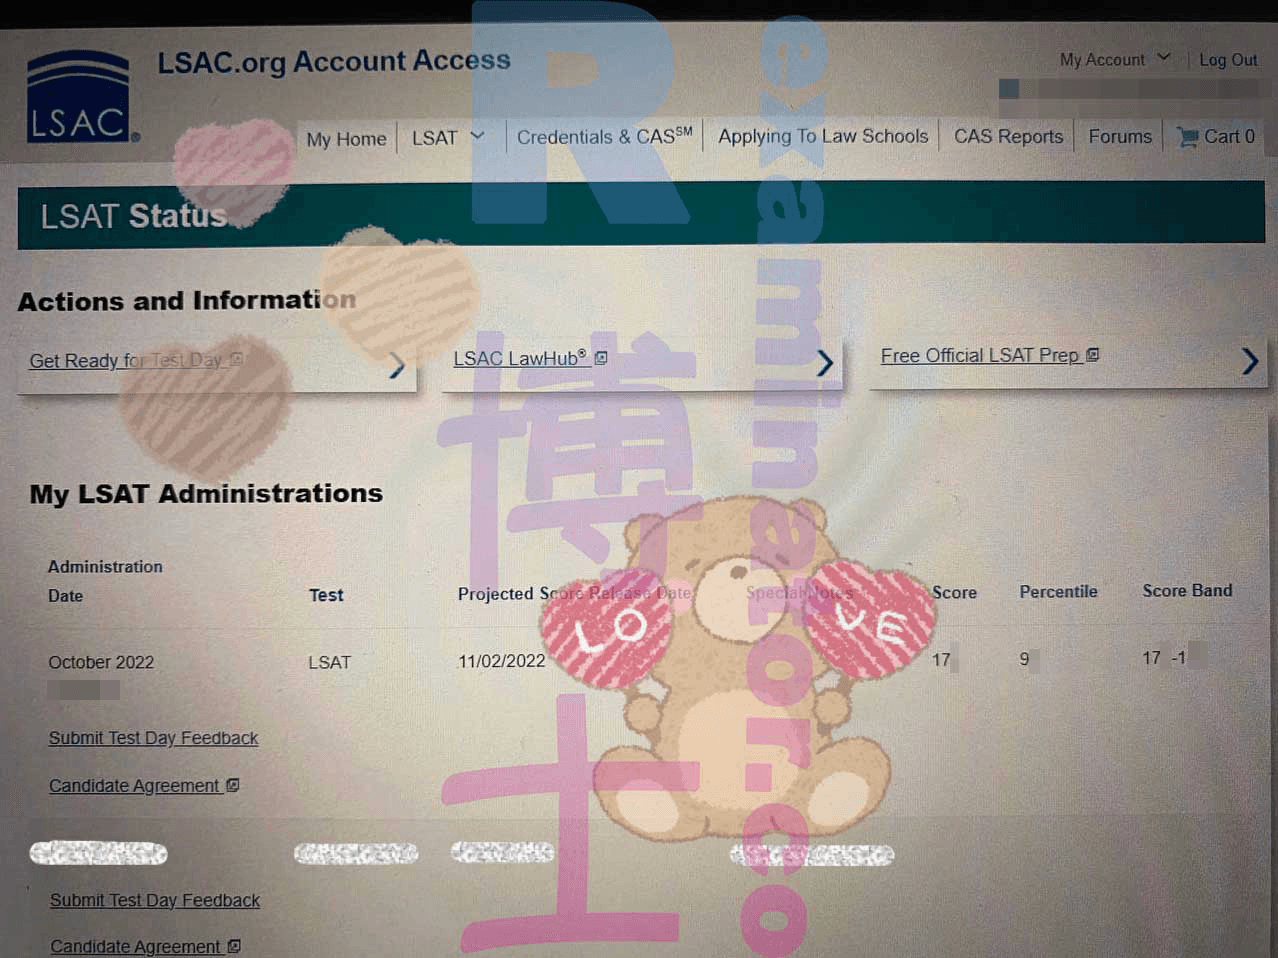 17X on Oct LSAT!!!✨ "As promised I'll be leaving a gratuity." Look at the internet speed! This epitomized proper preparation!